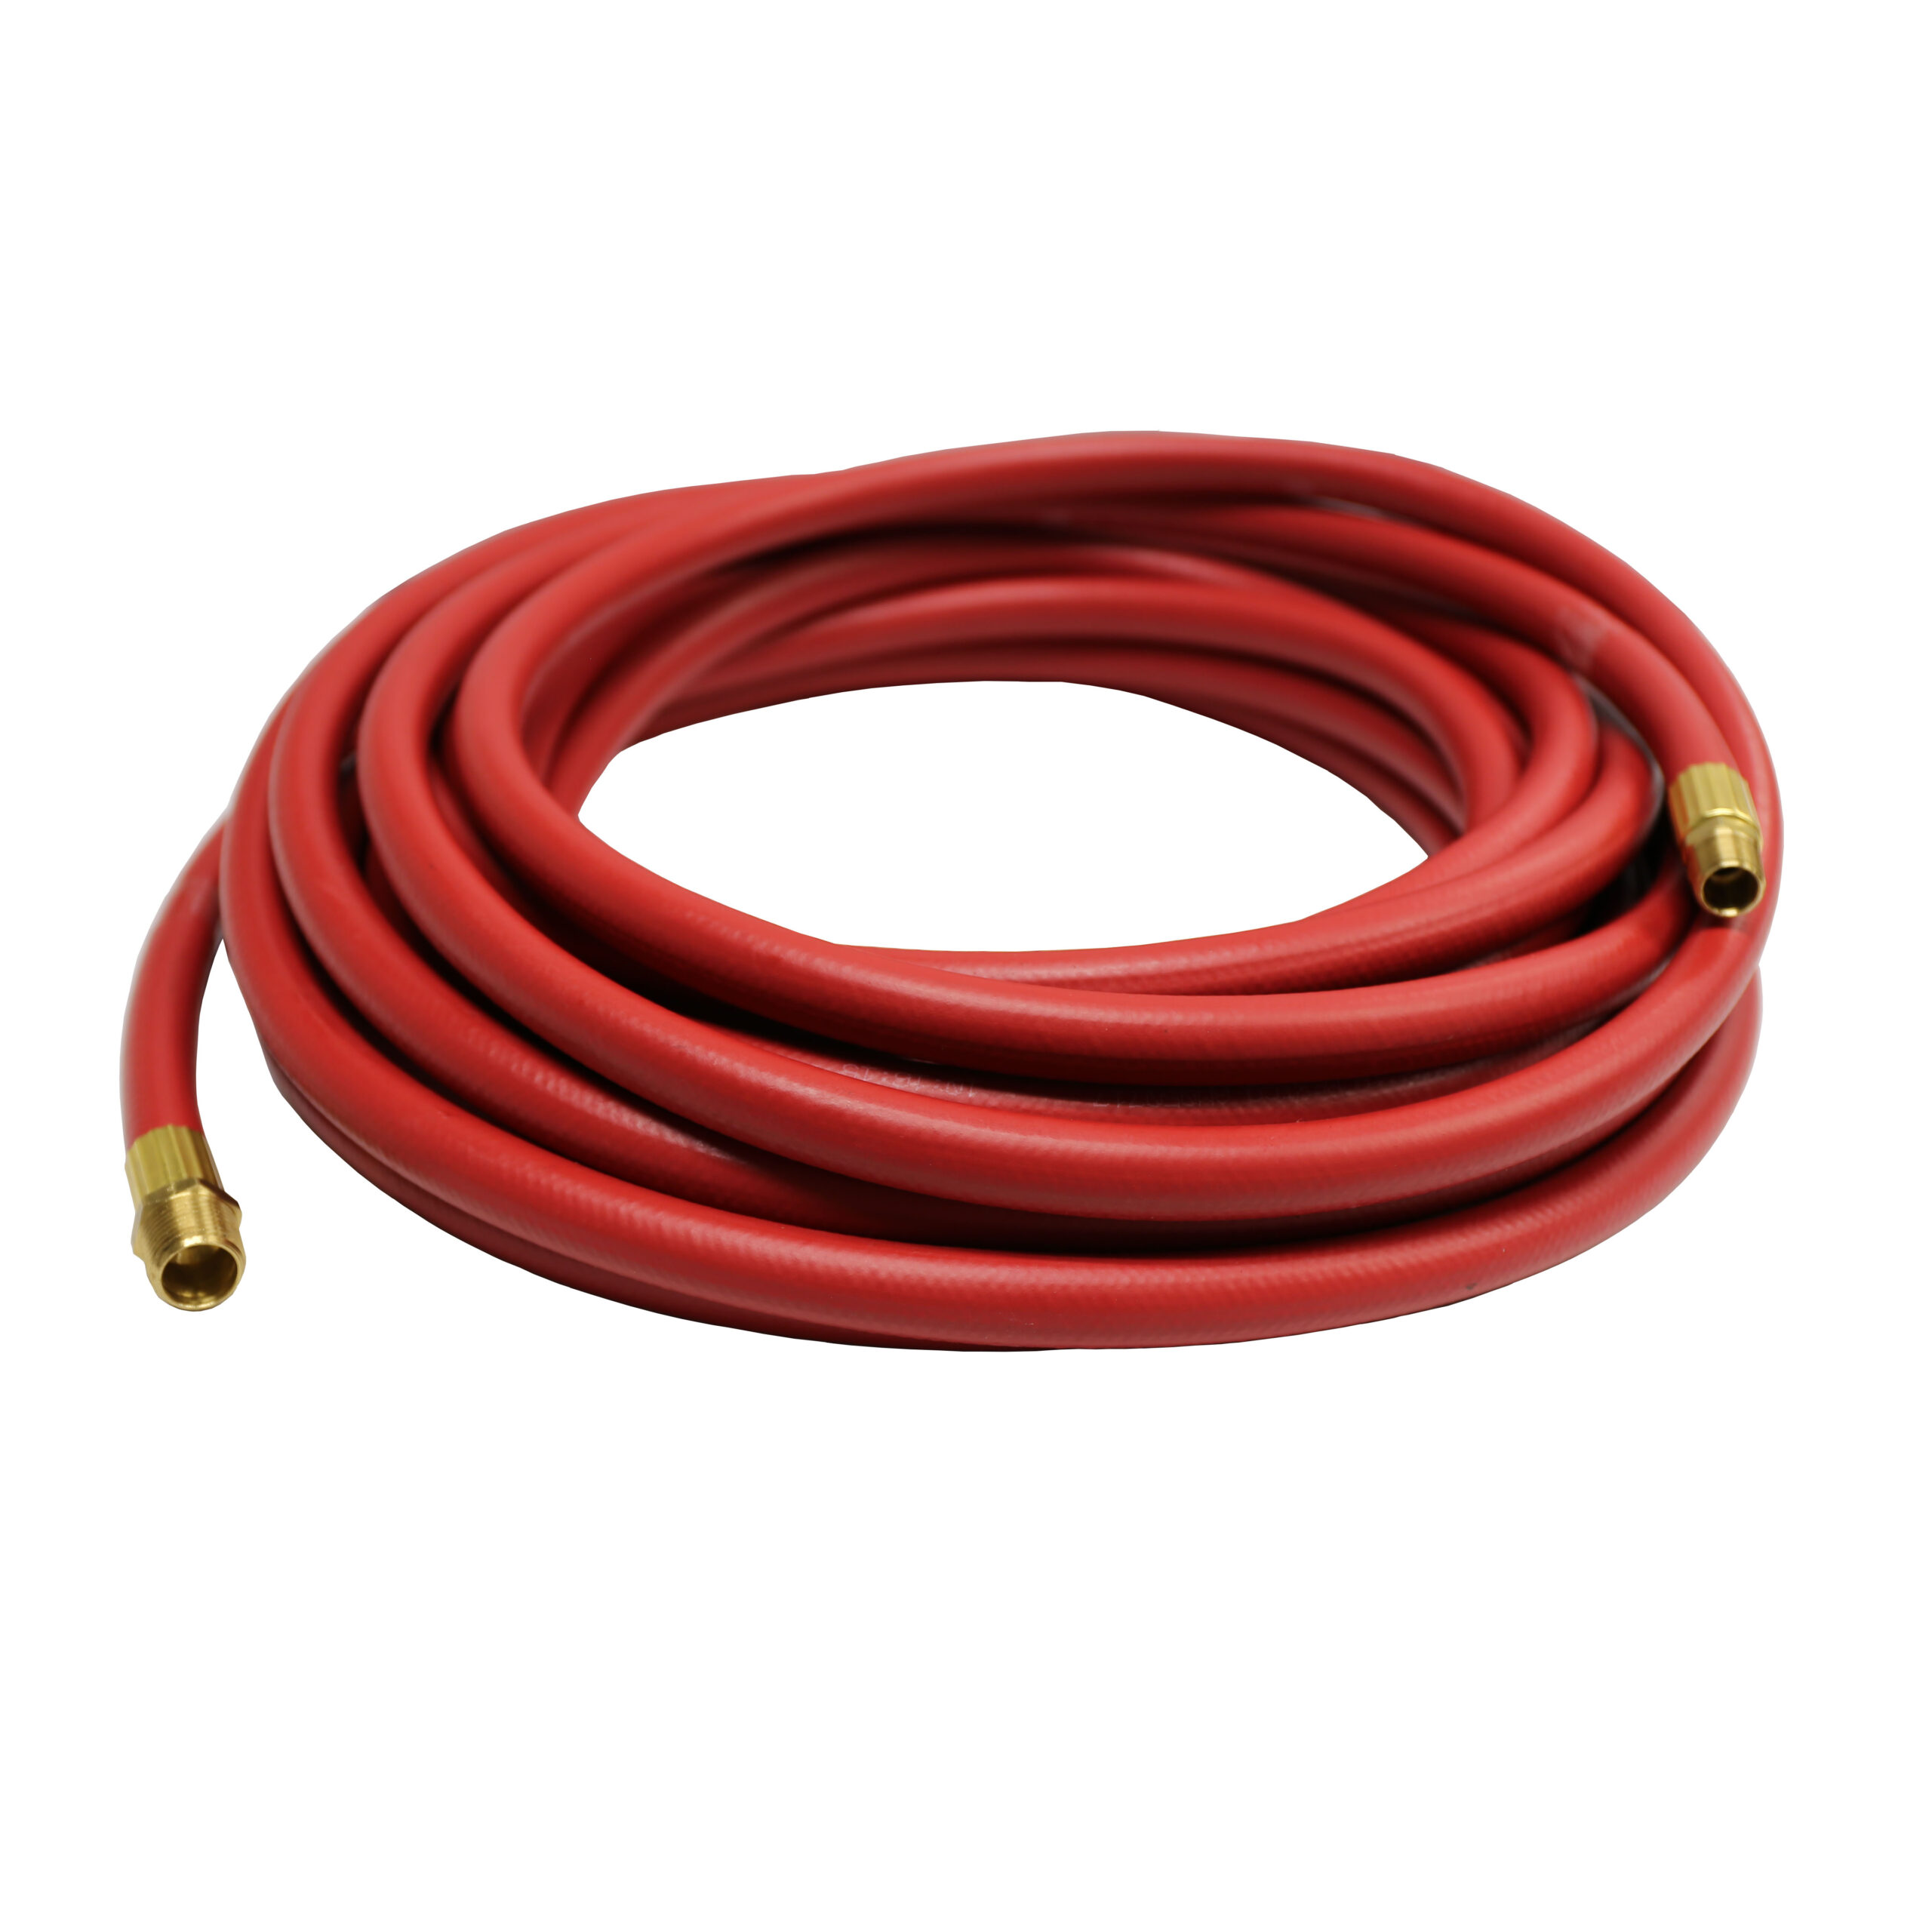 Reelcraft 601146-100 - 3/4 in. x 100 ft. Low Pressure Rubber Air Hose